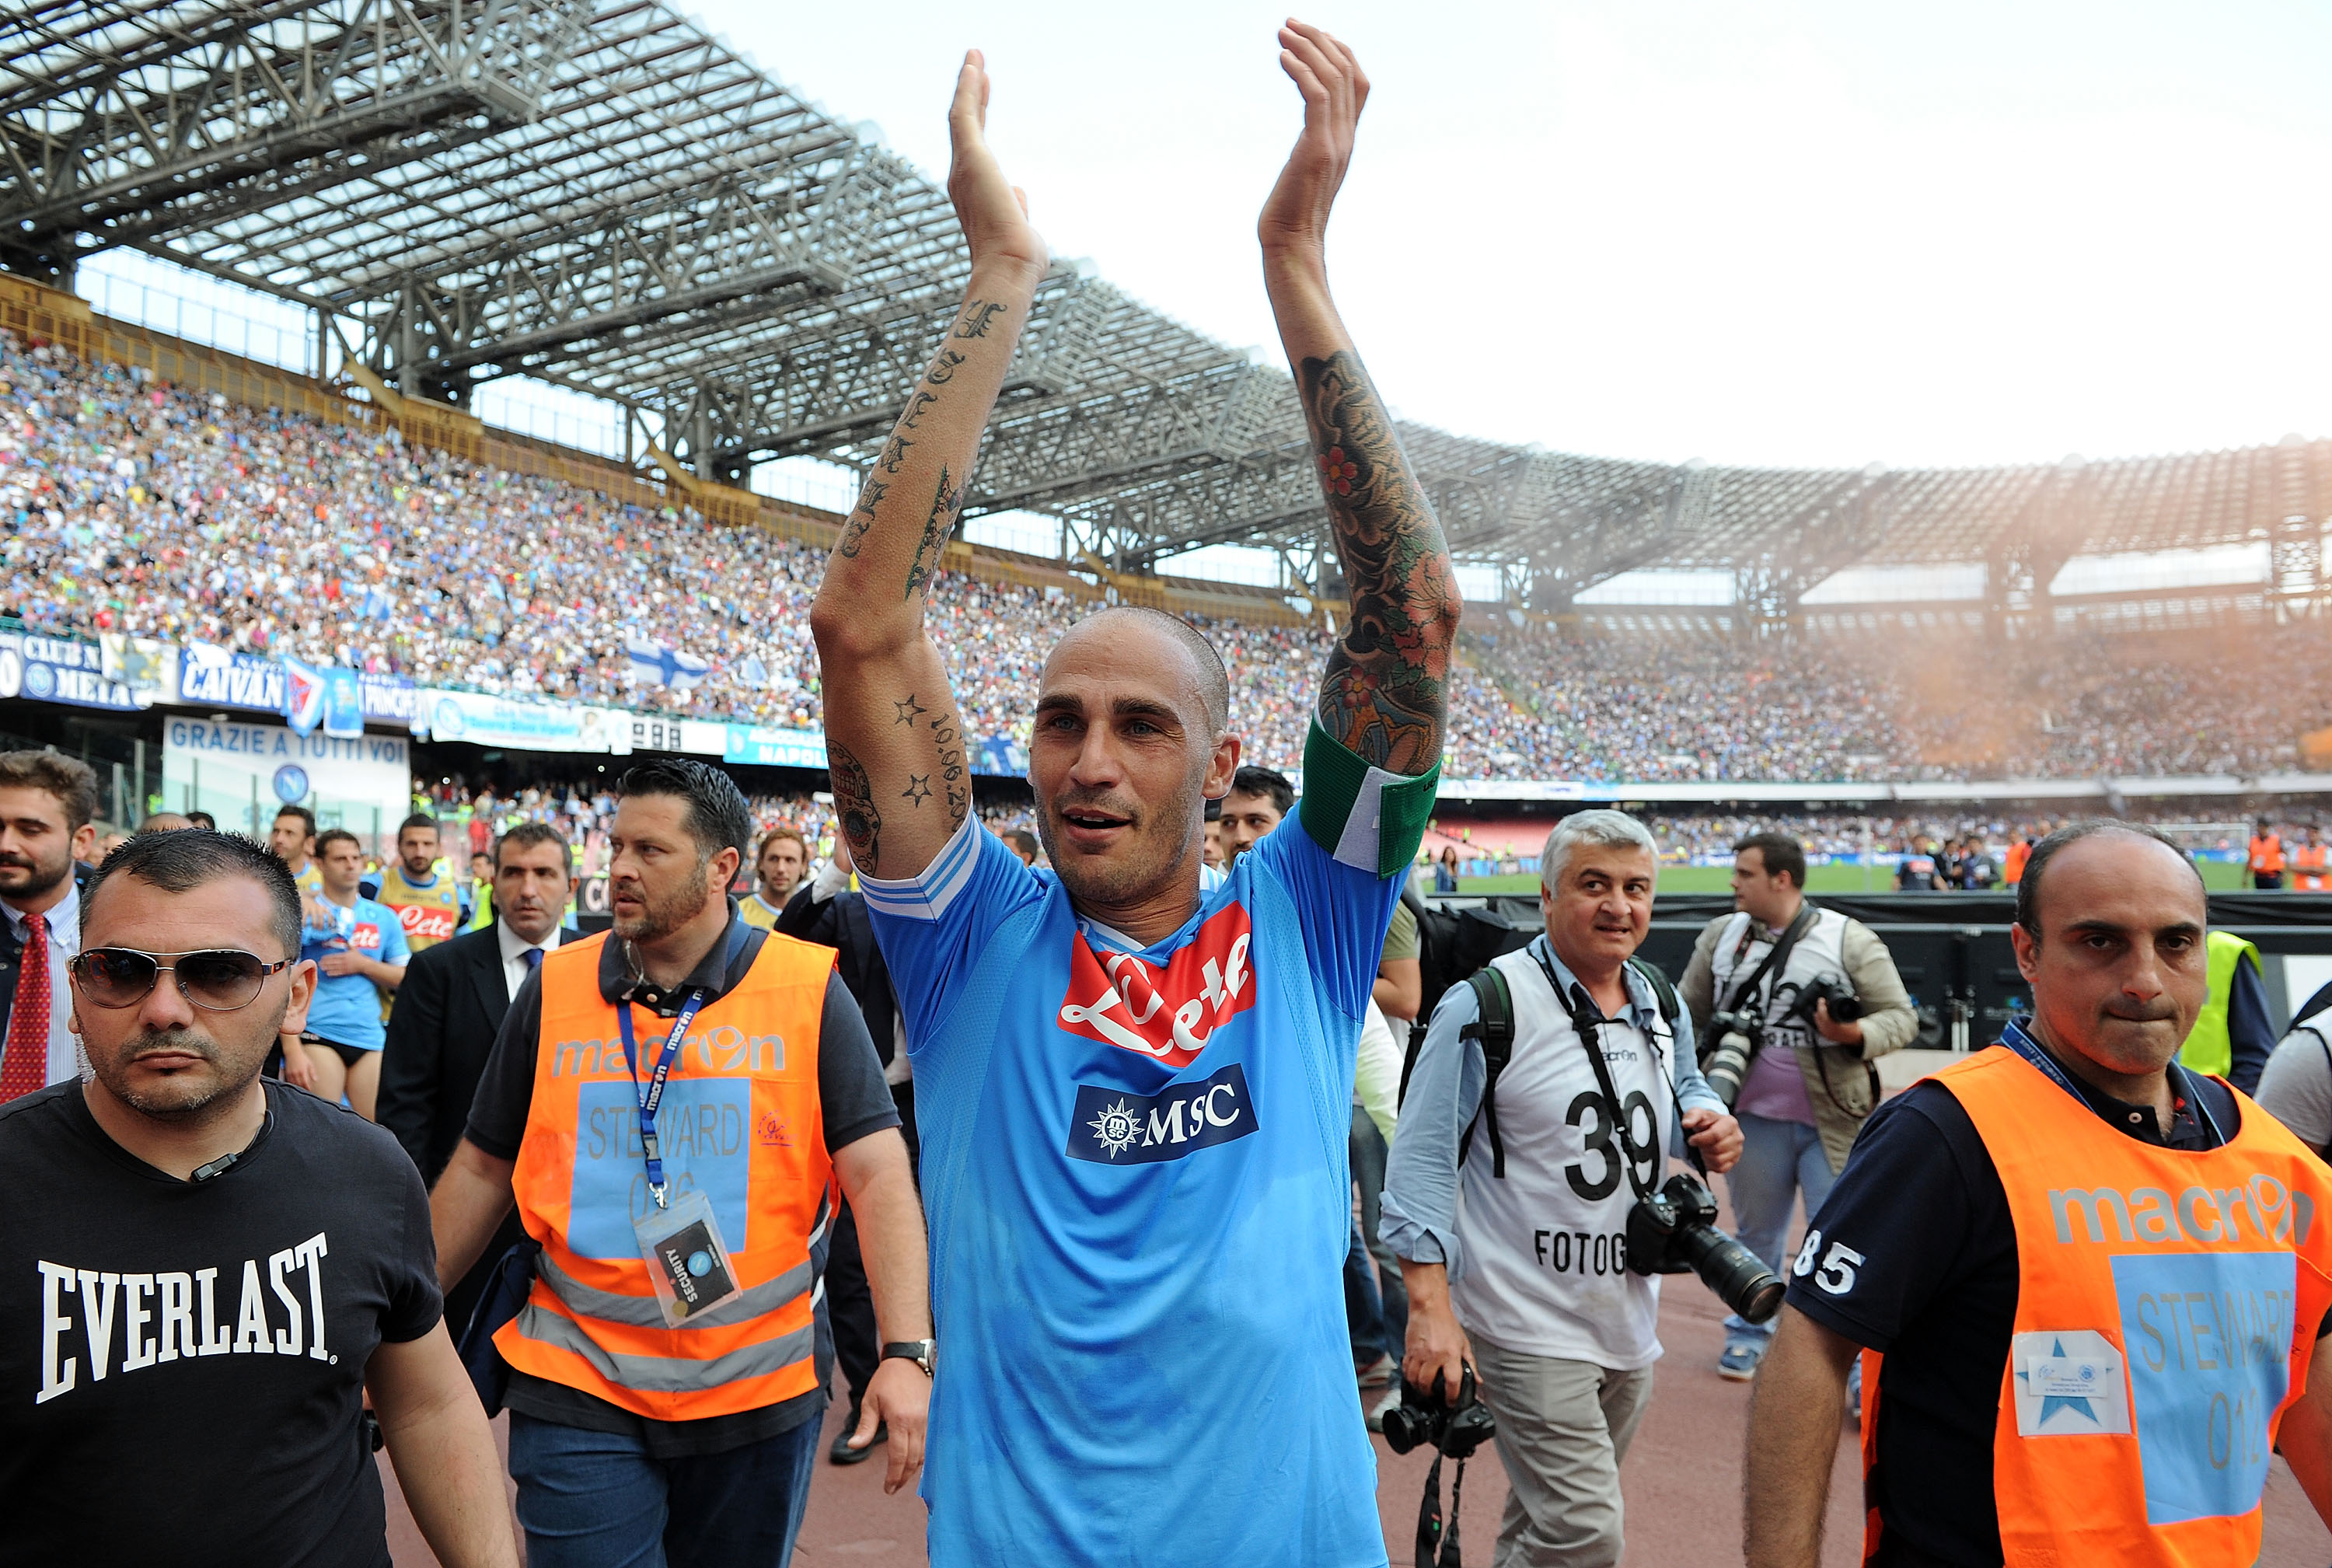 NAPLES, ITALY - MAY 12:  Paolo Cannavaro of Napoli celebrates the victory after the Serie A match between SSC Napoli and AC Siena at Stadio San Paolo on May 12, 2013 in Naples, Italy.  (Photo by Giuseppe Bellini/Getty Images)